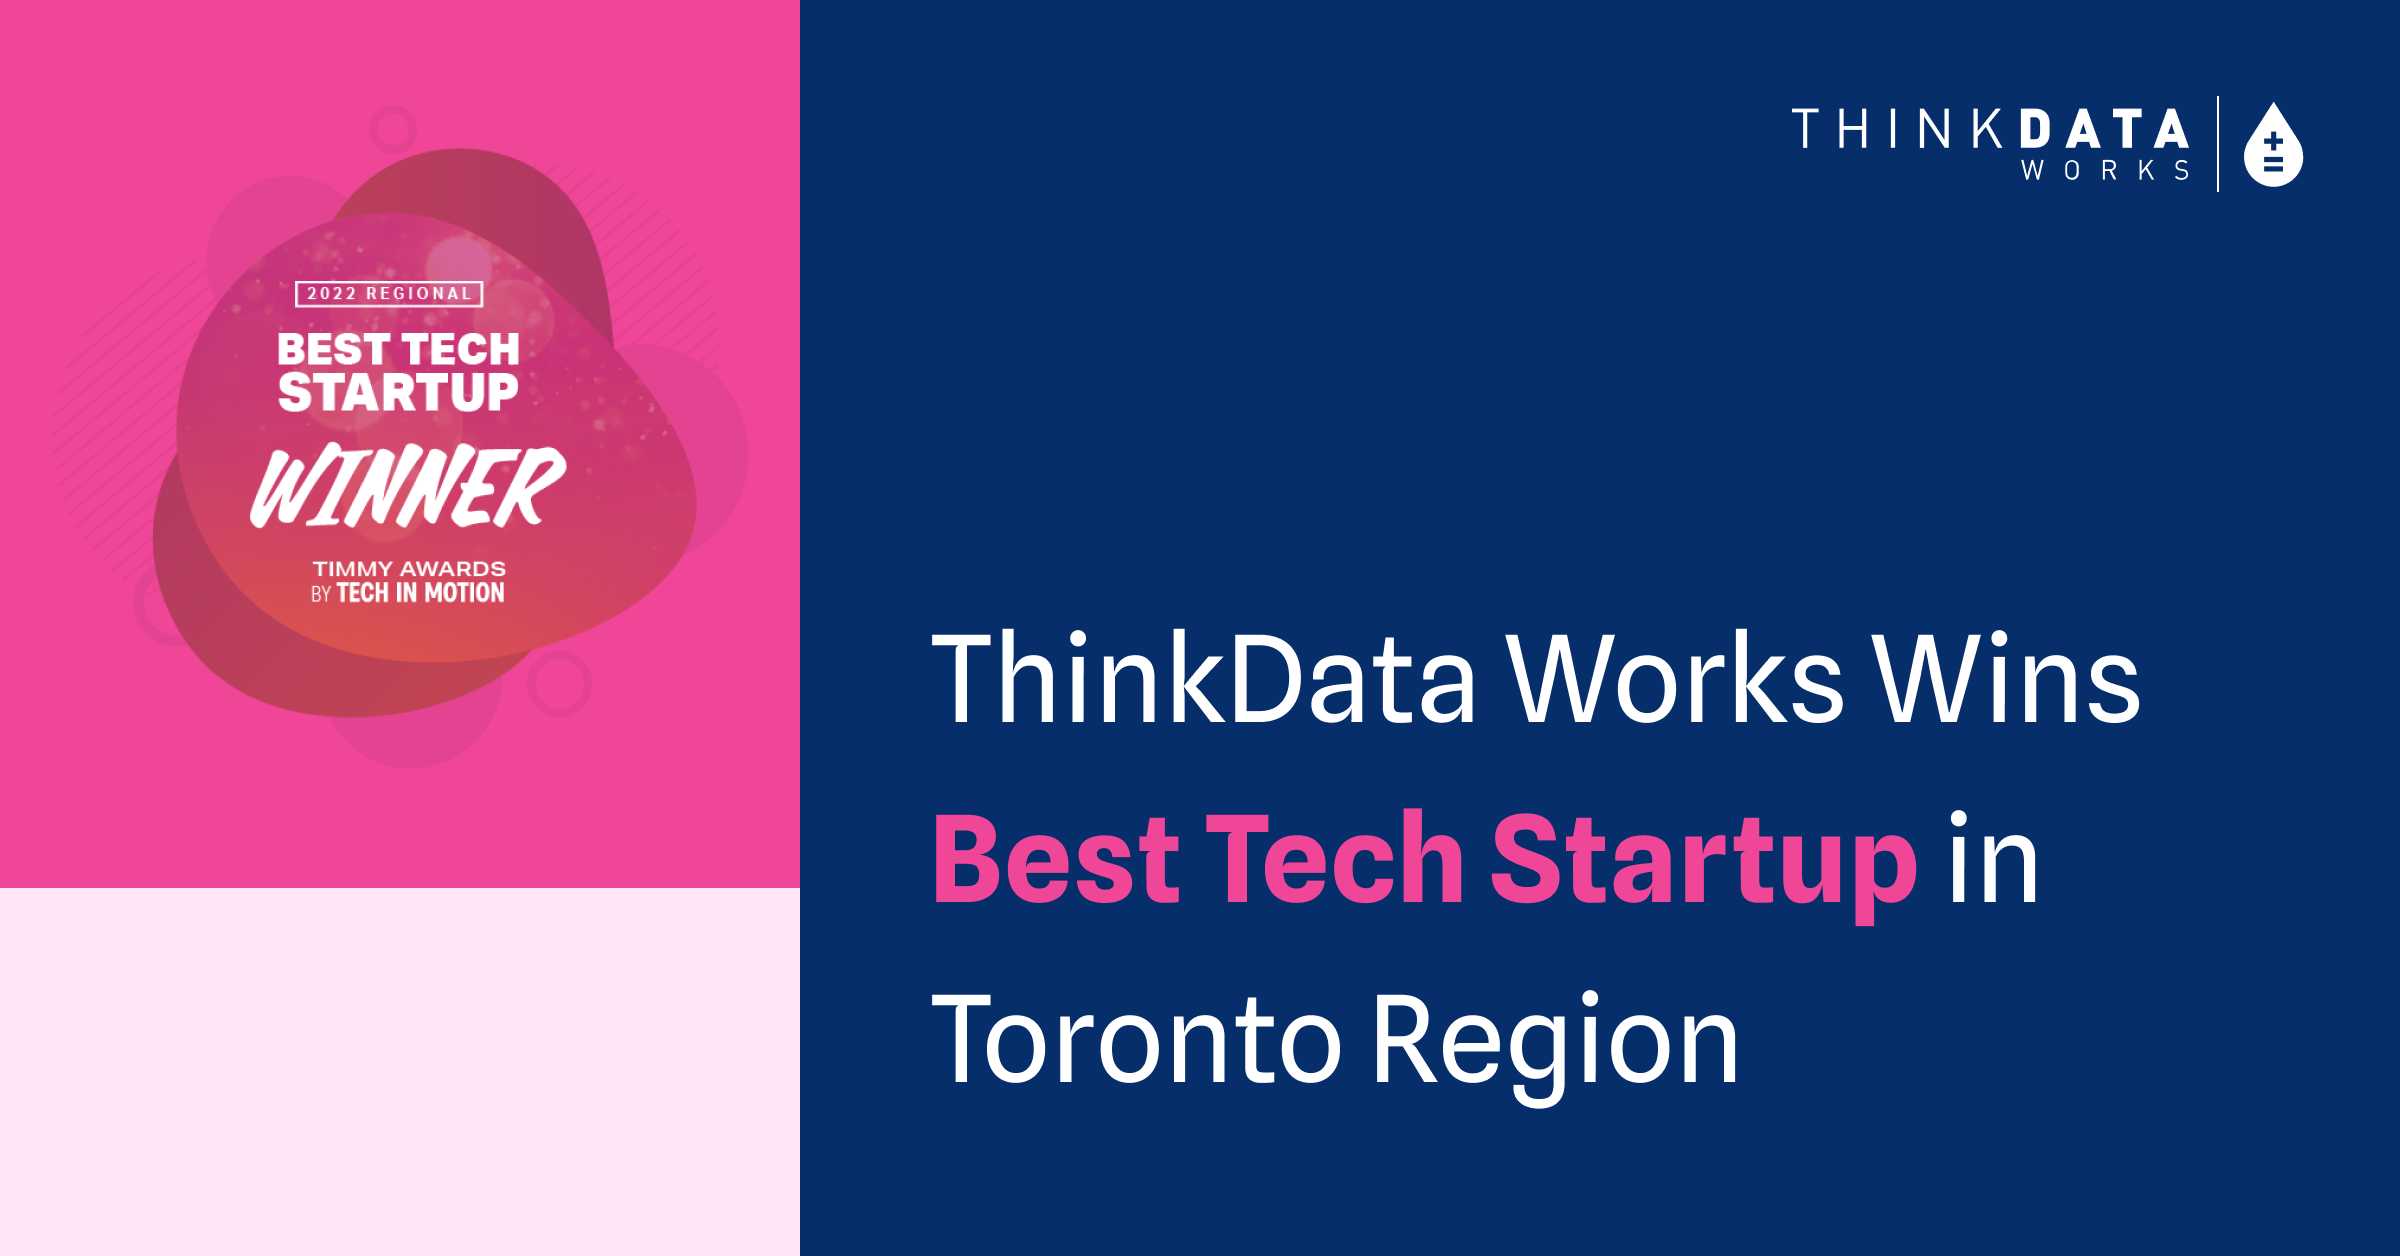 ThinkData Works named Best Toronto Tech Startup from 2022 Timmy Awards by Tech in Motion